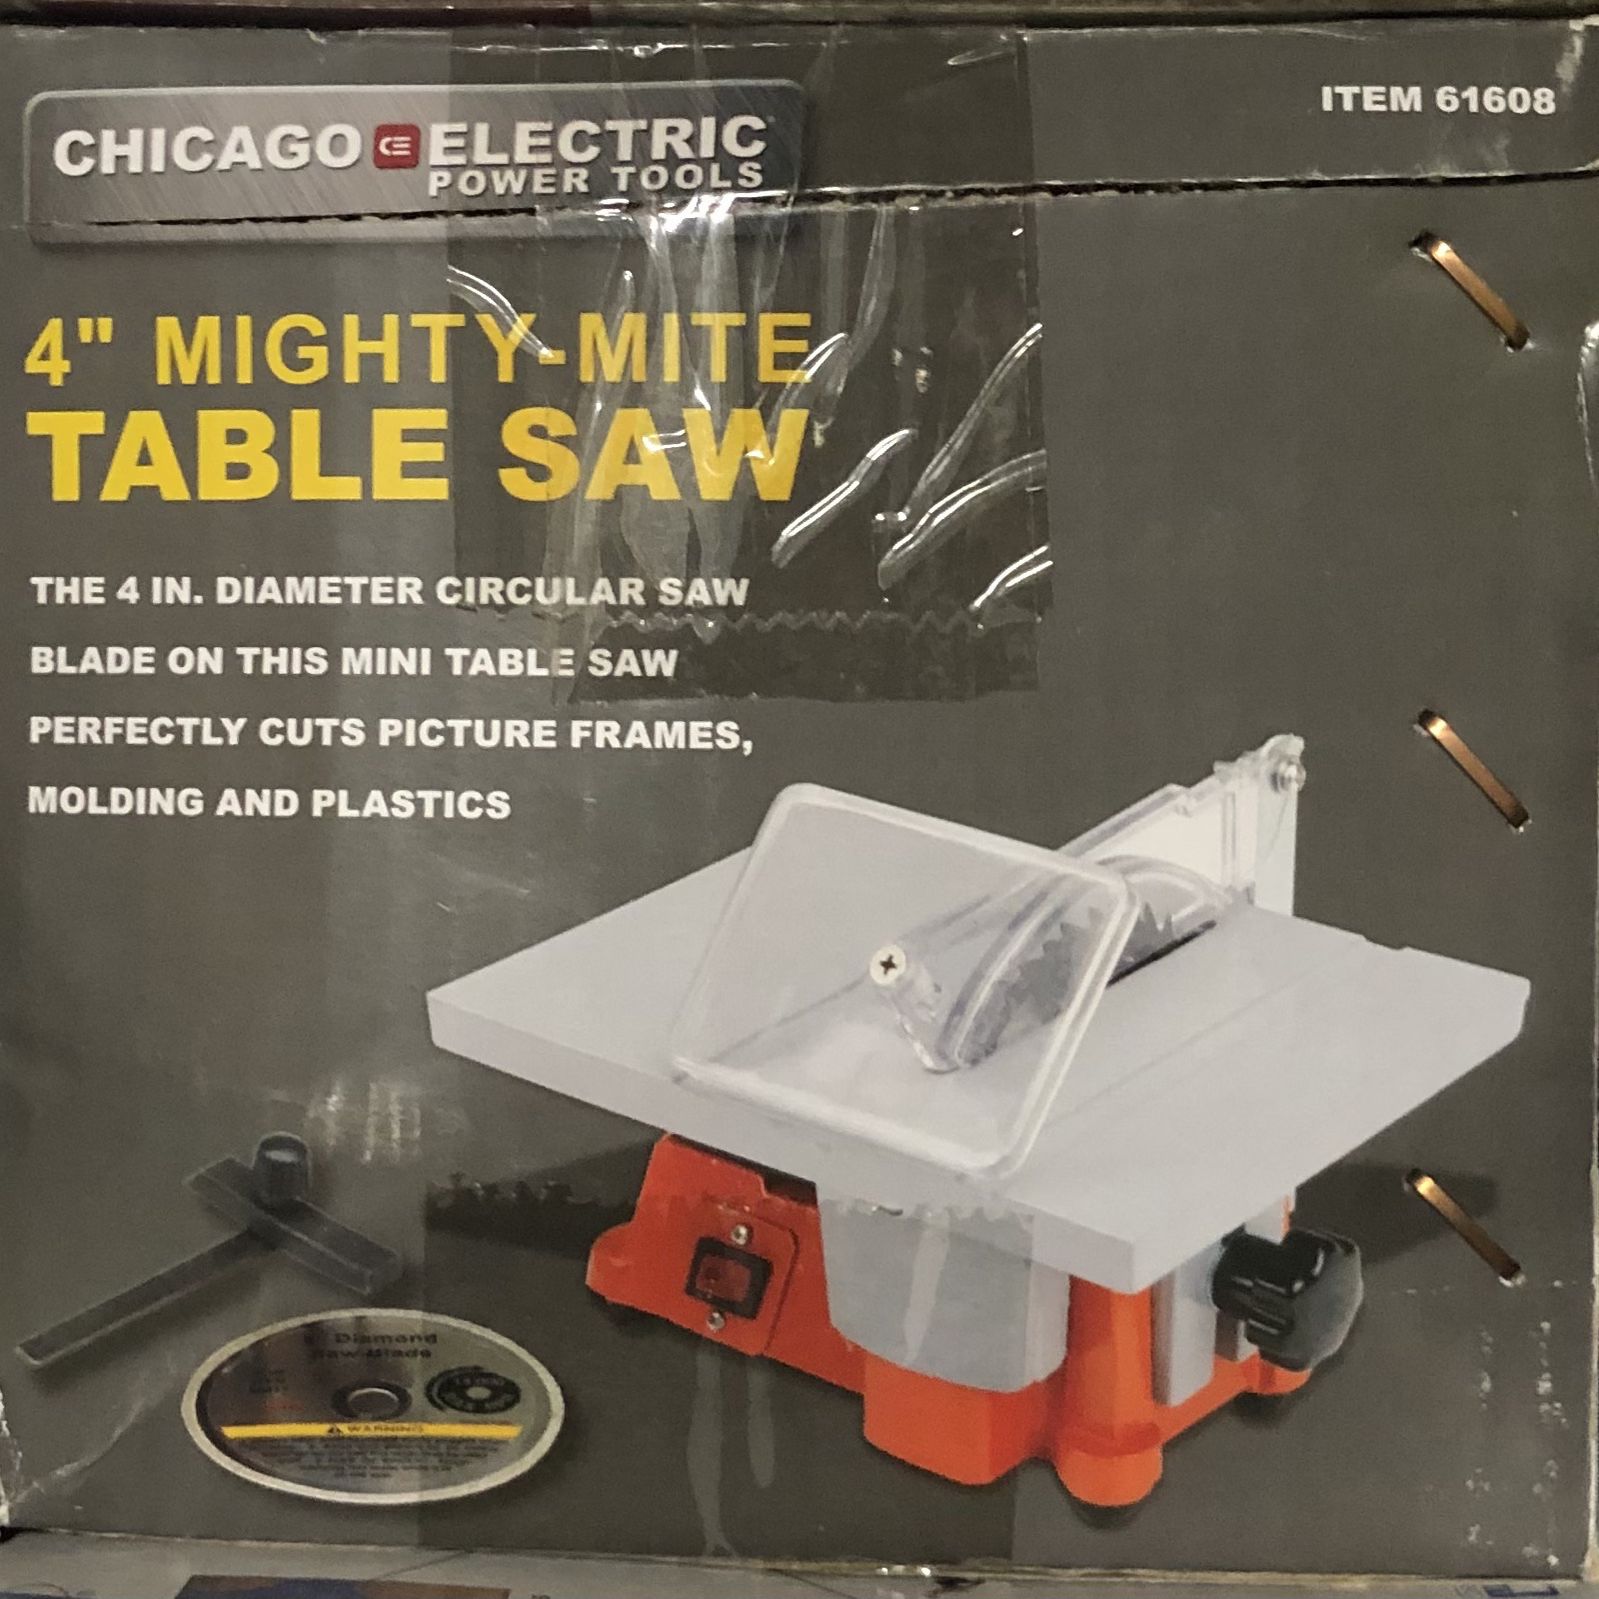 Table Saw 4” Mighty-Mite for Sale in Silver Spring, MD OfferUp